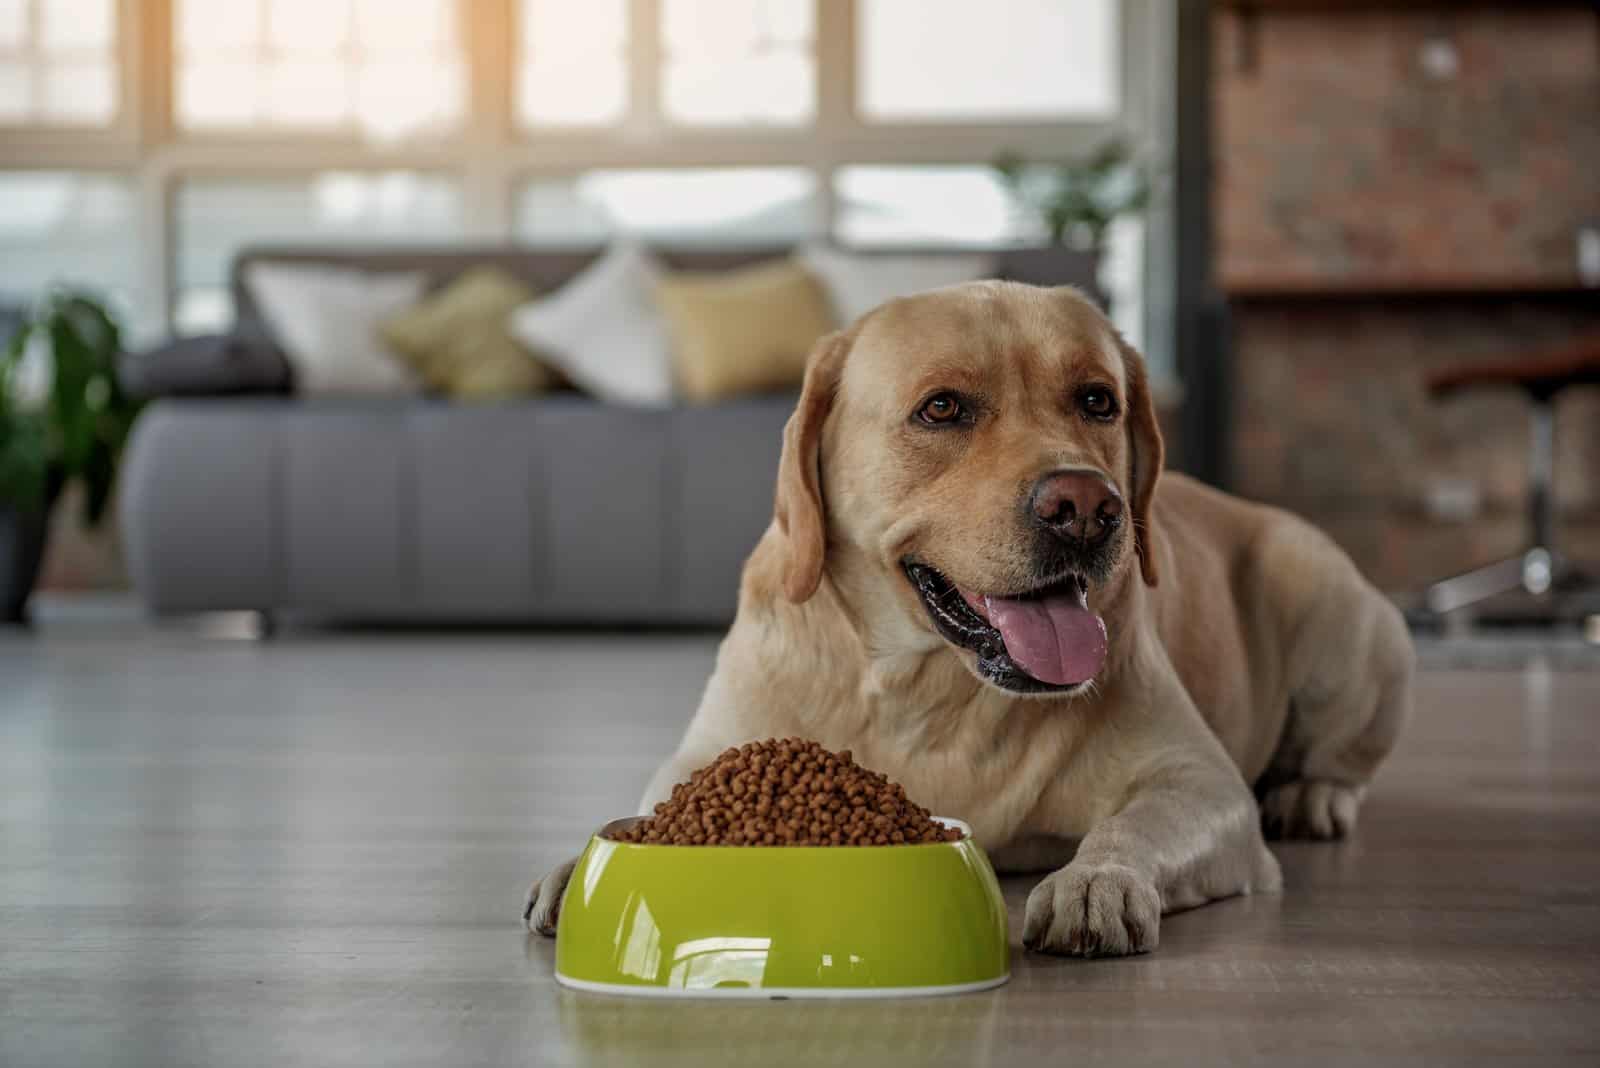 How To Soften Dog Food: 8 Best Solutions